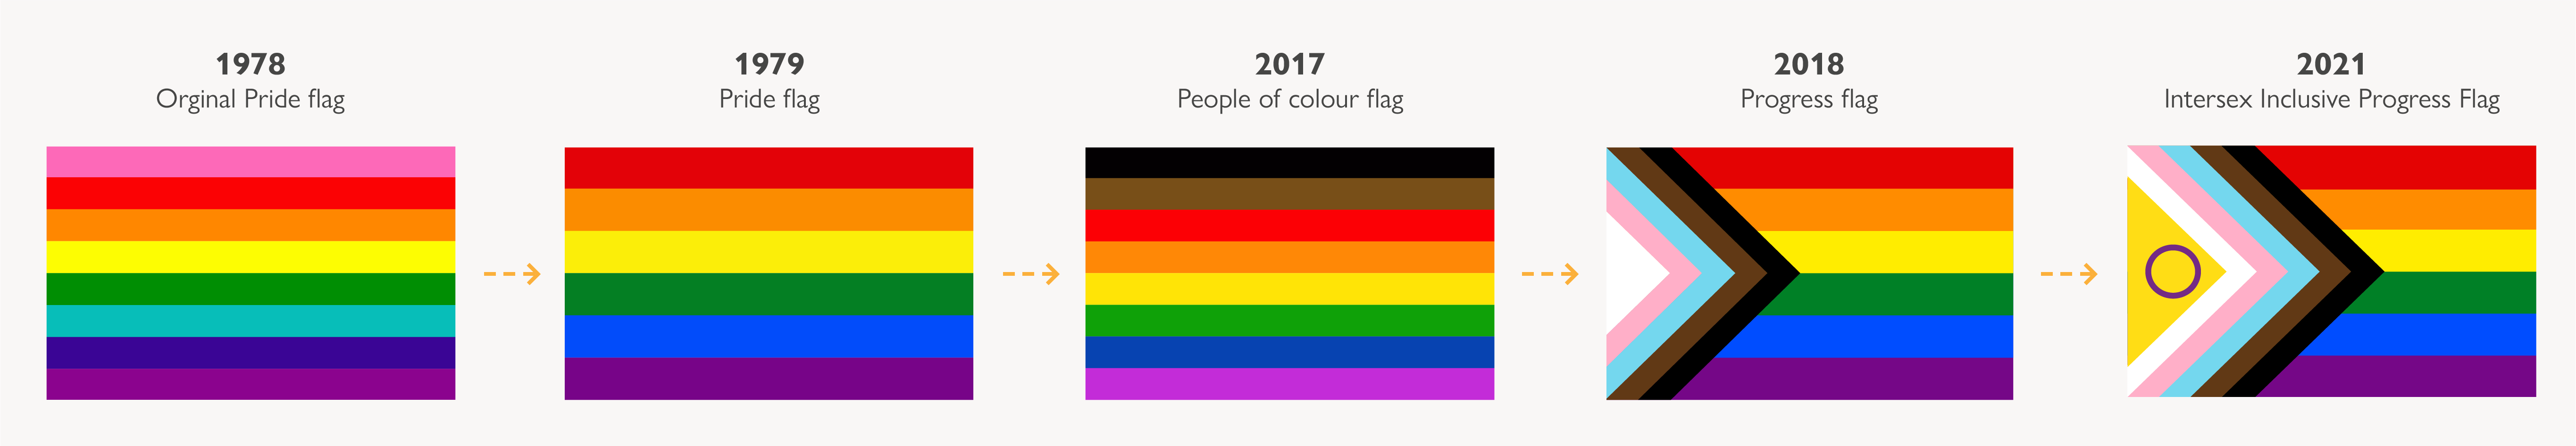 History of the Pride flag from 1978, 1979, 2017, 2018 and 2021